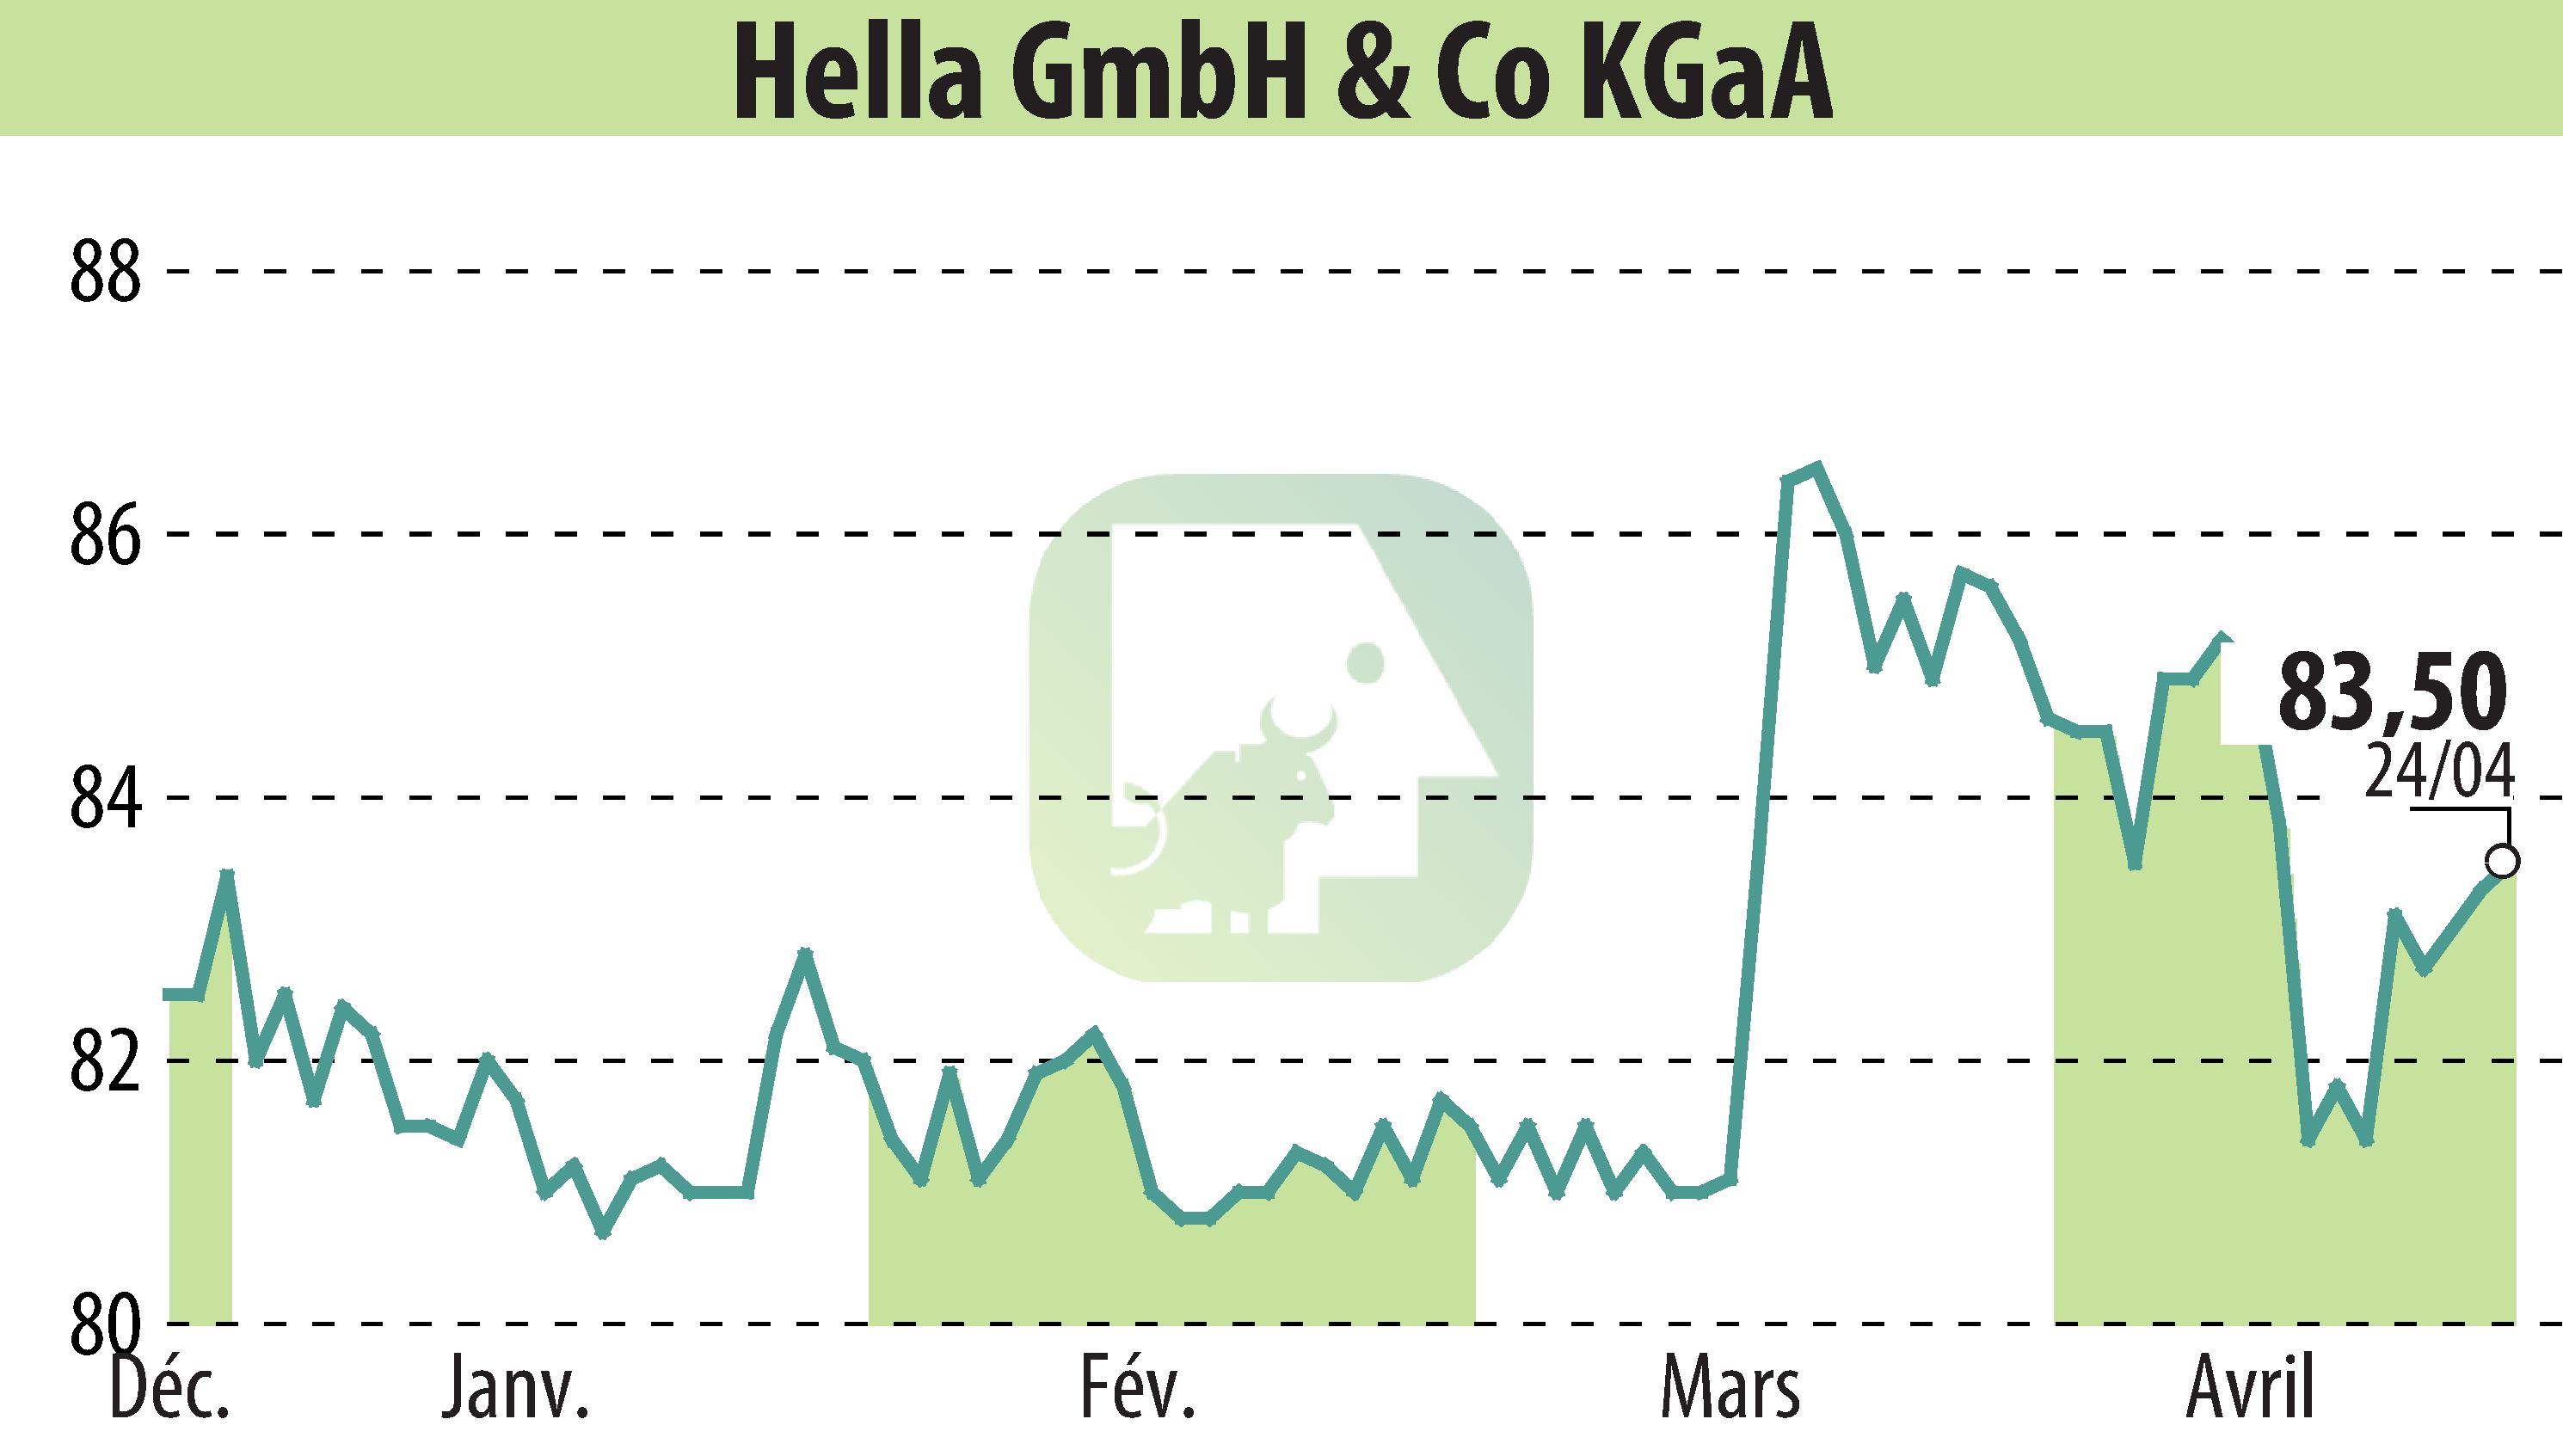 Stock price chart of HELLA GmbH & Co. KGaA (EBR:HLE) showing fluctuations.